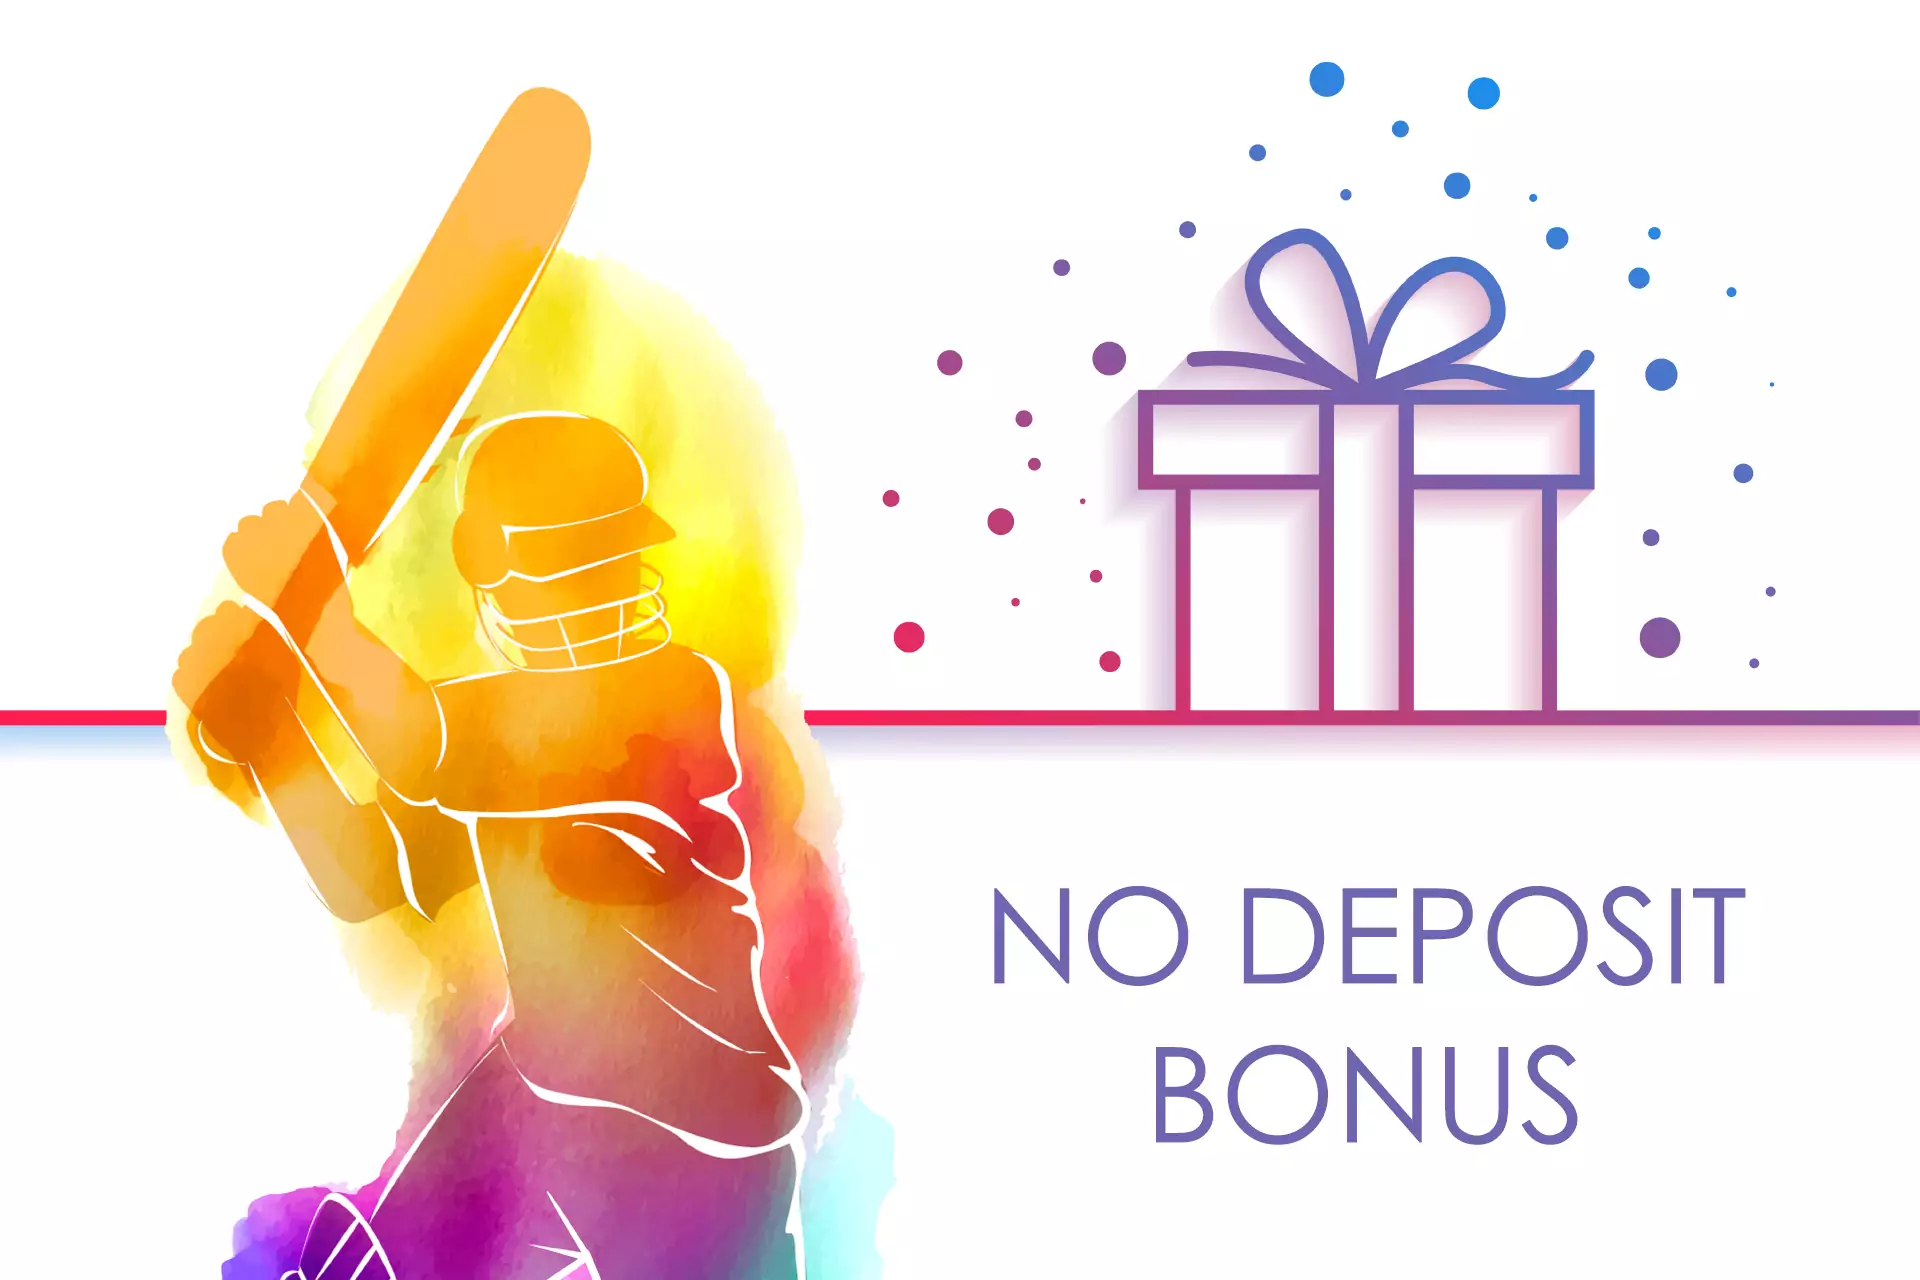 No deposit bonus allows you not to risk real money when betting on cricket.